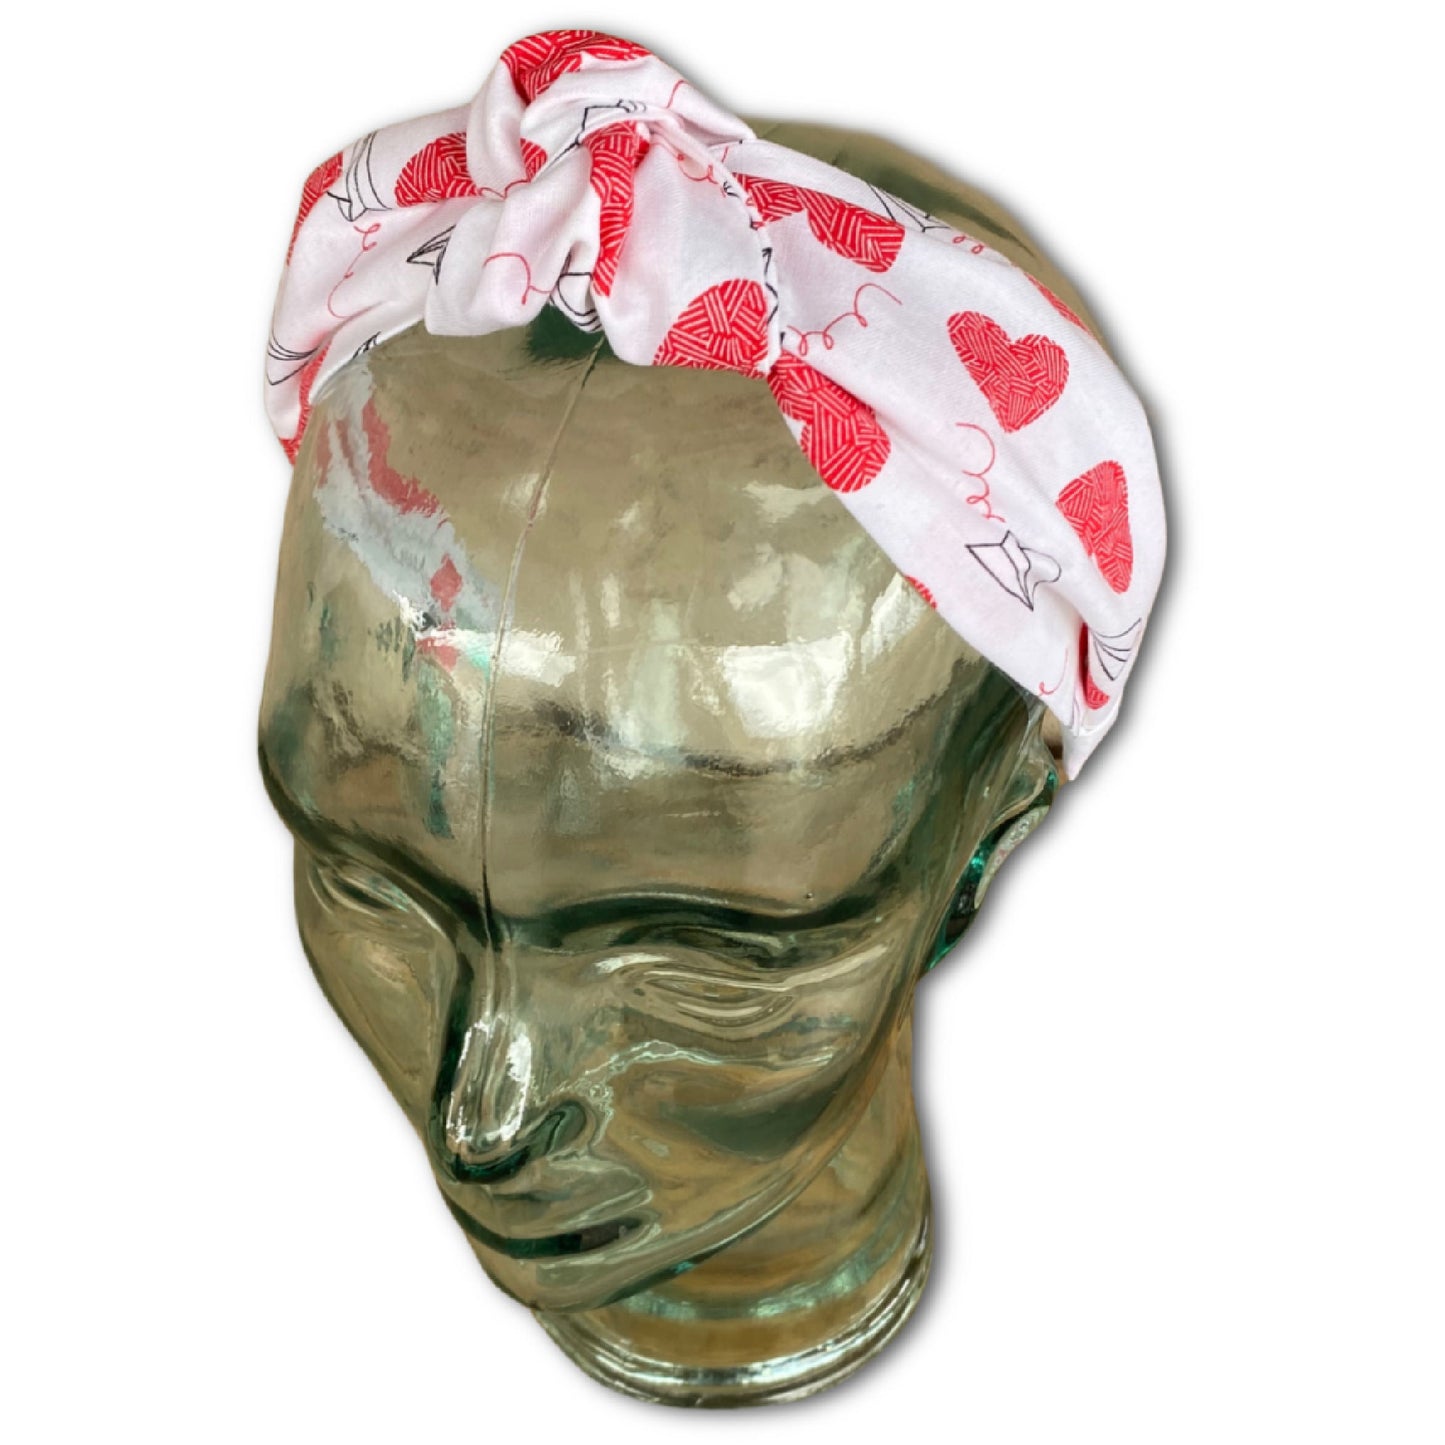 headband that has a knot at top. made with a cotton print that is white with red large hearts and paper airplane outlines